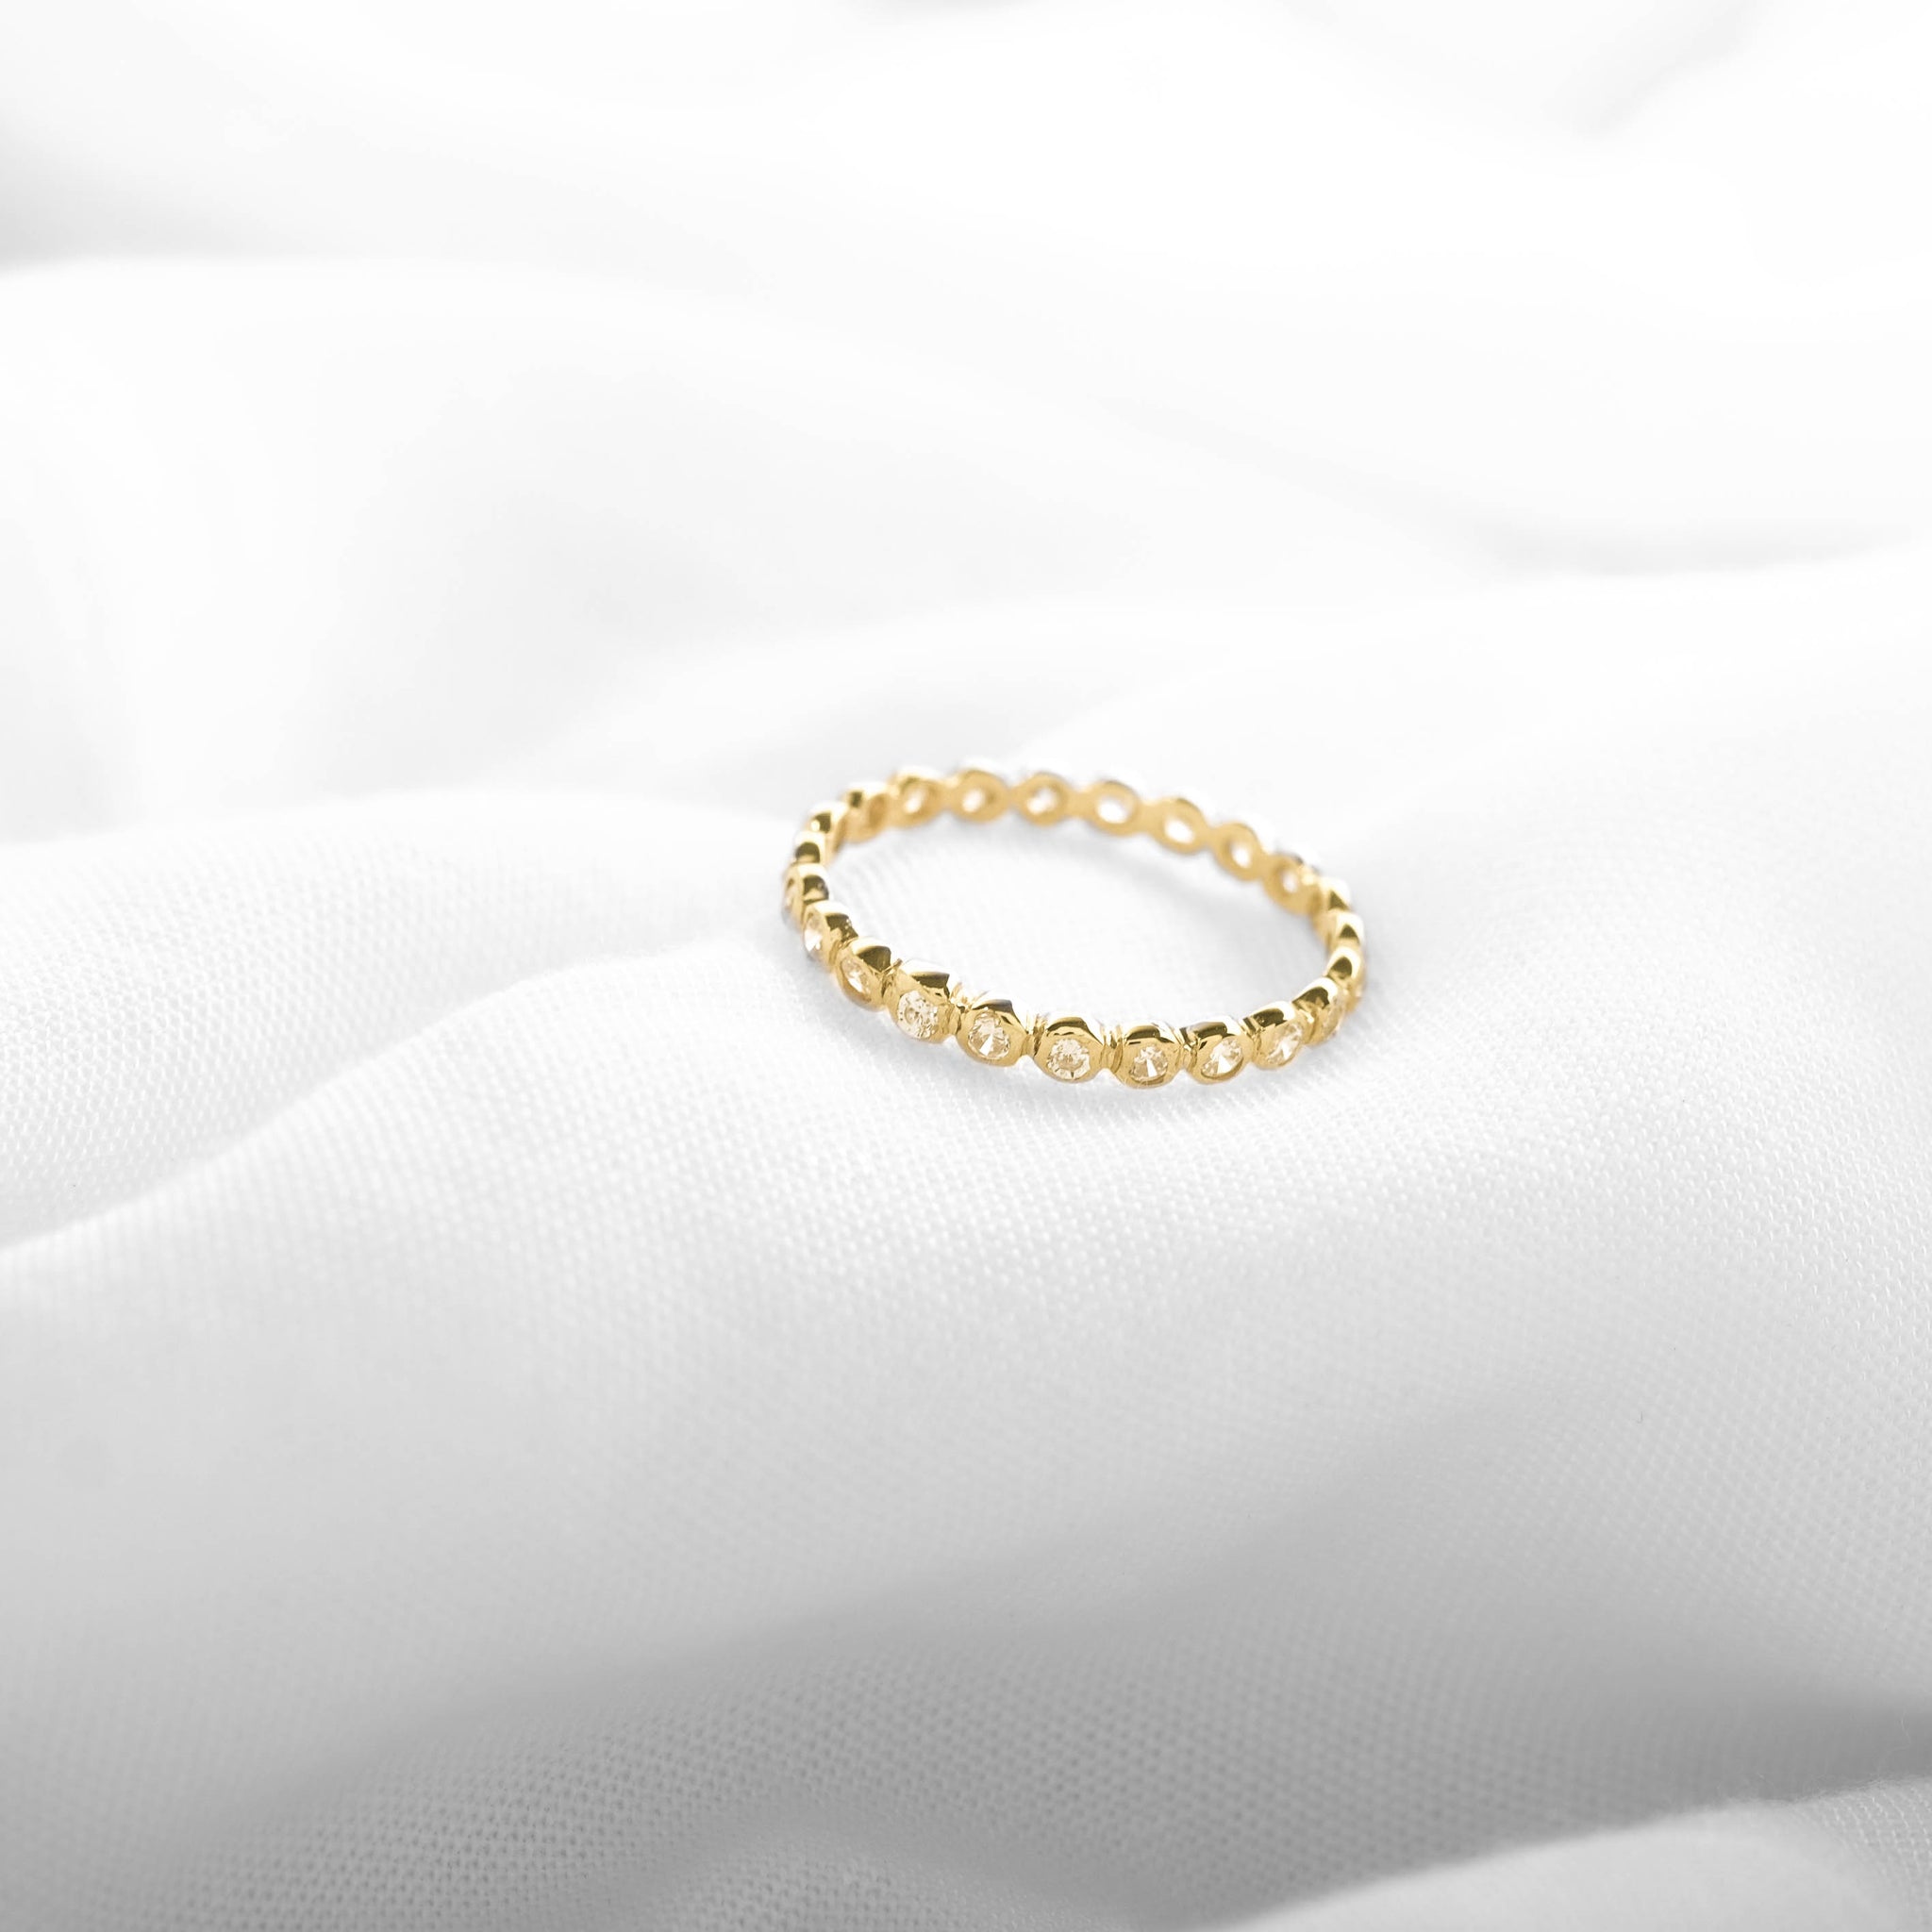 Petite Sterling Silver Stacking Ring With Zircon and 18k Gold Plated/ Rhodium Available sizes